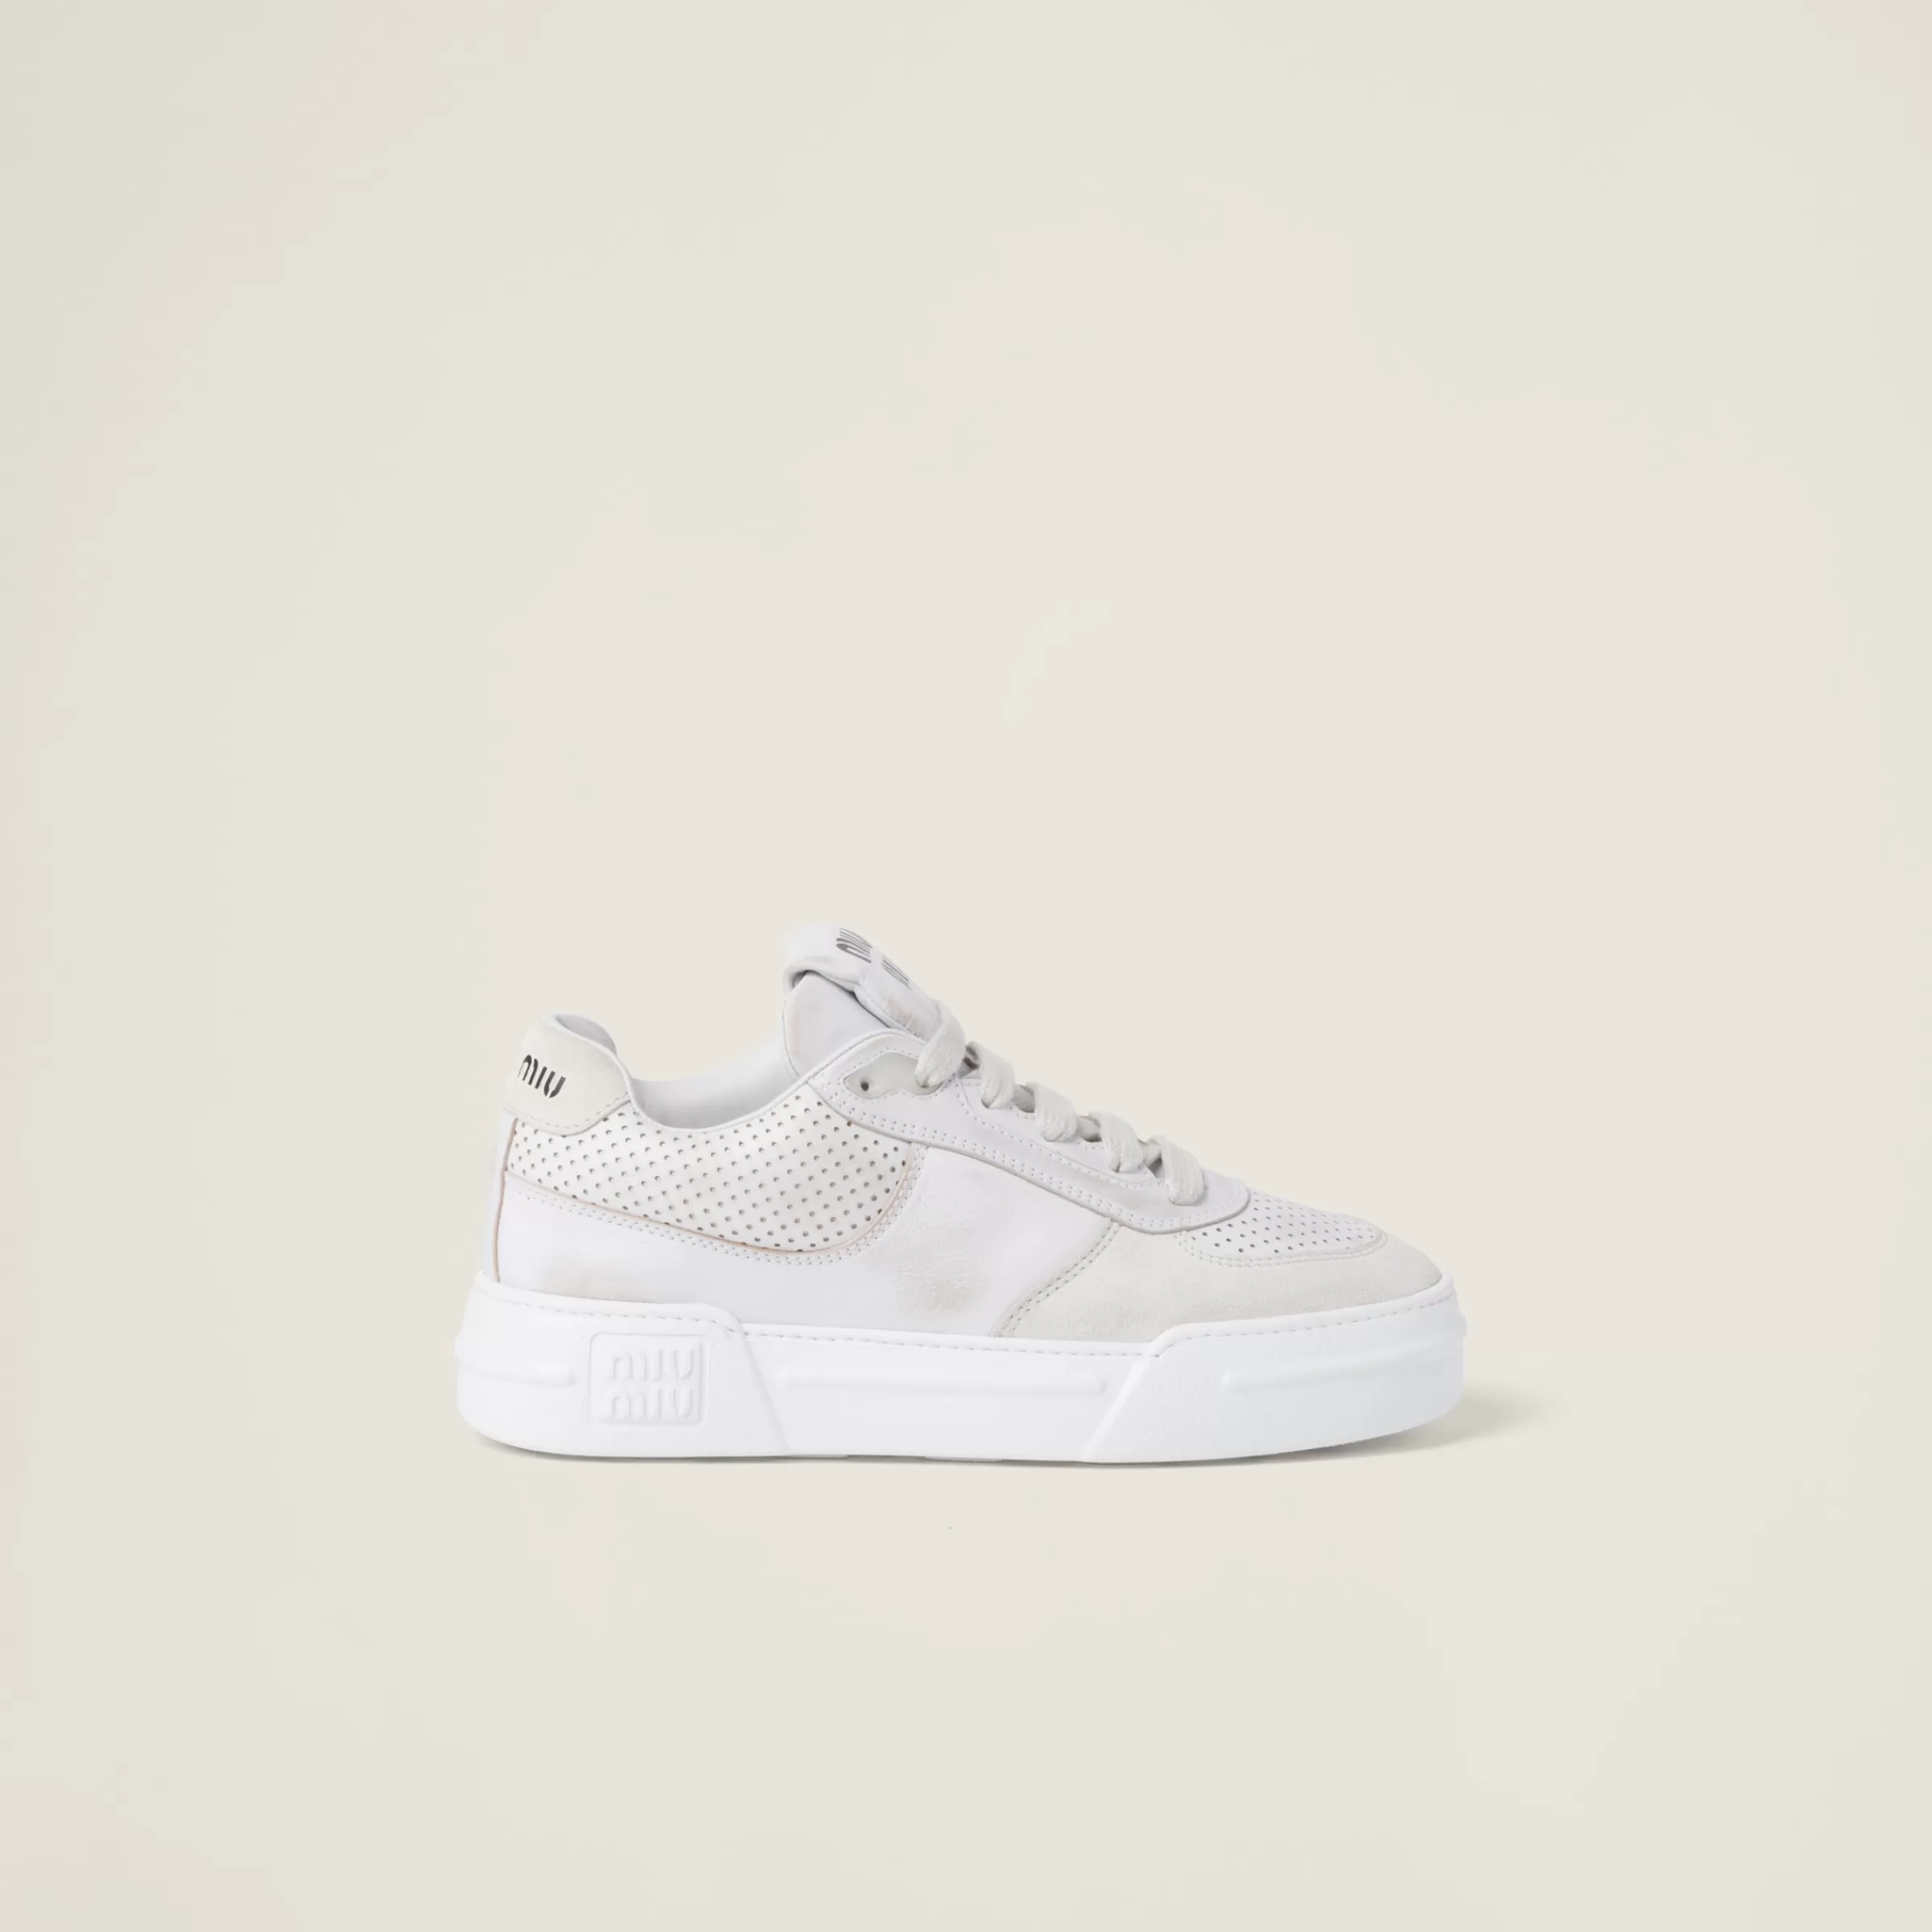 Miu Miu Bleached Leather And Suede Sneakers |